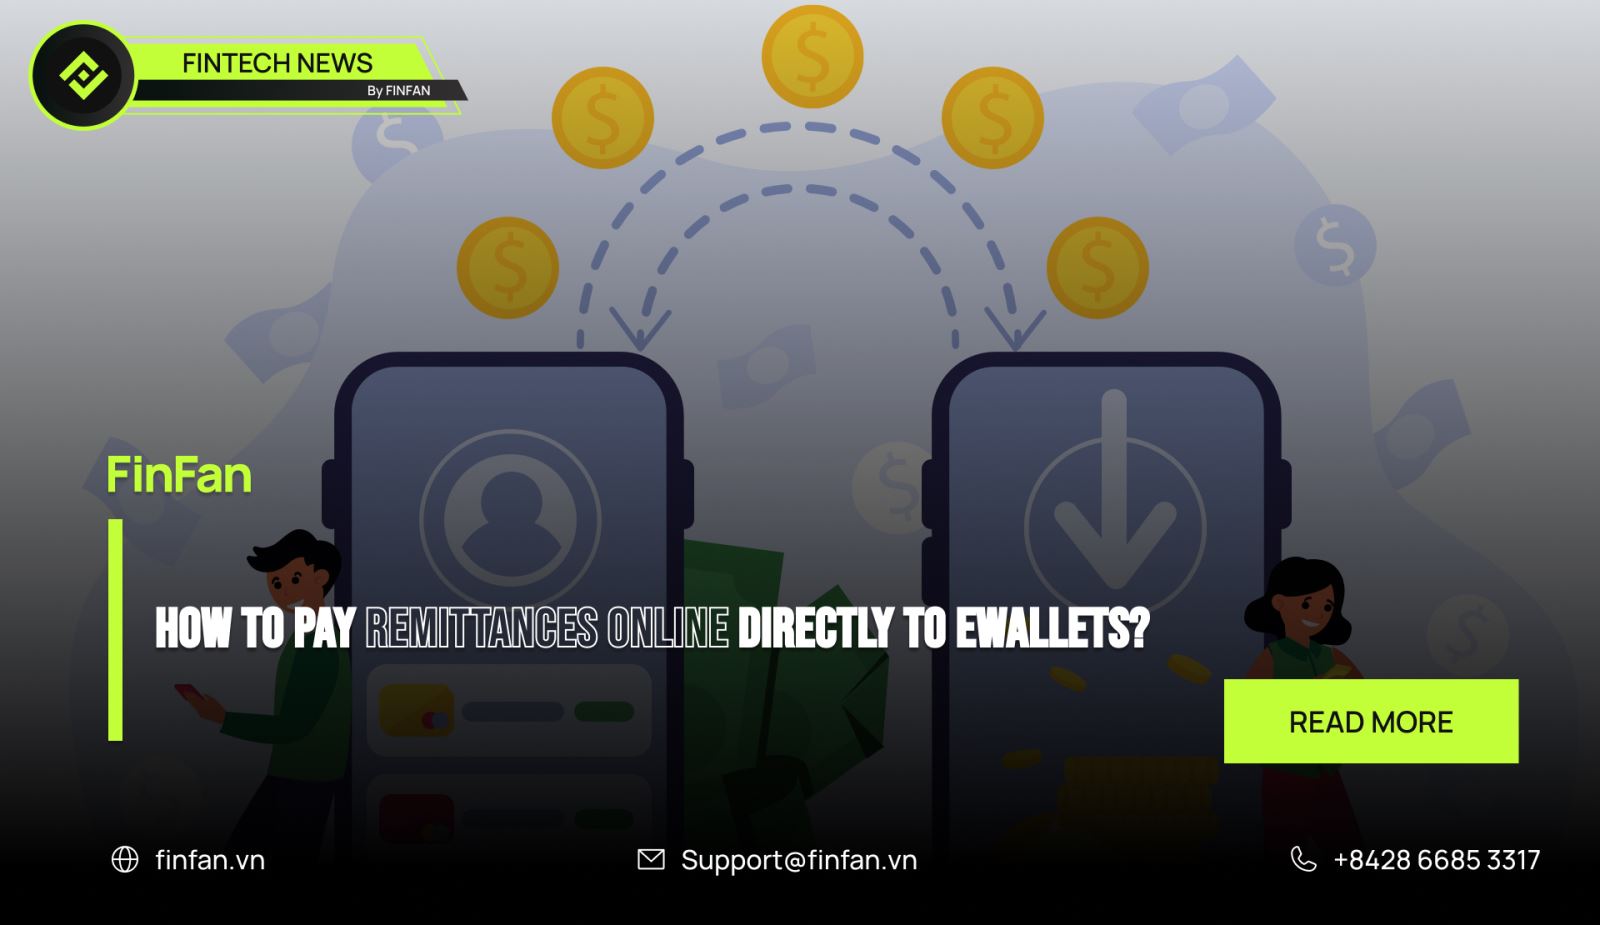 How to pay remittances online directly to ewallets?